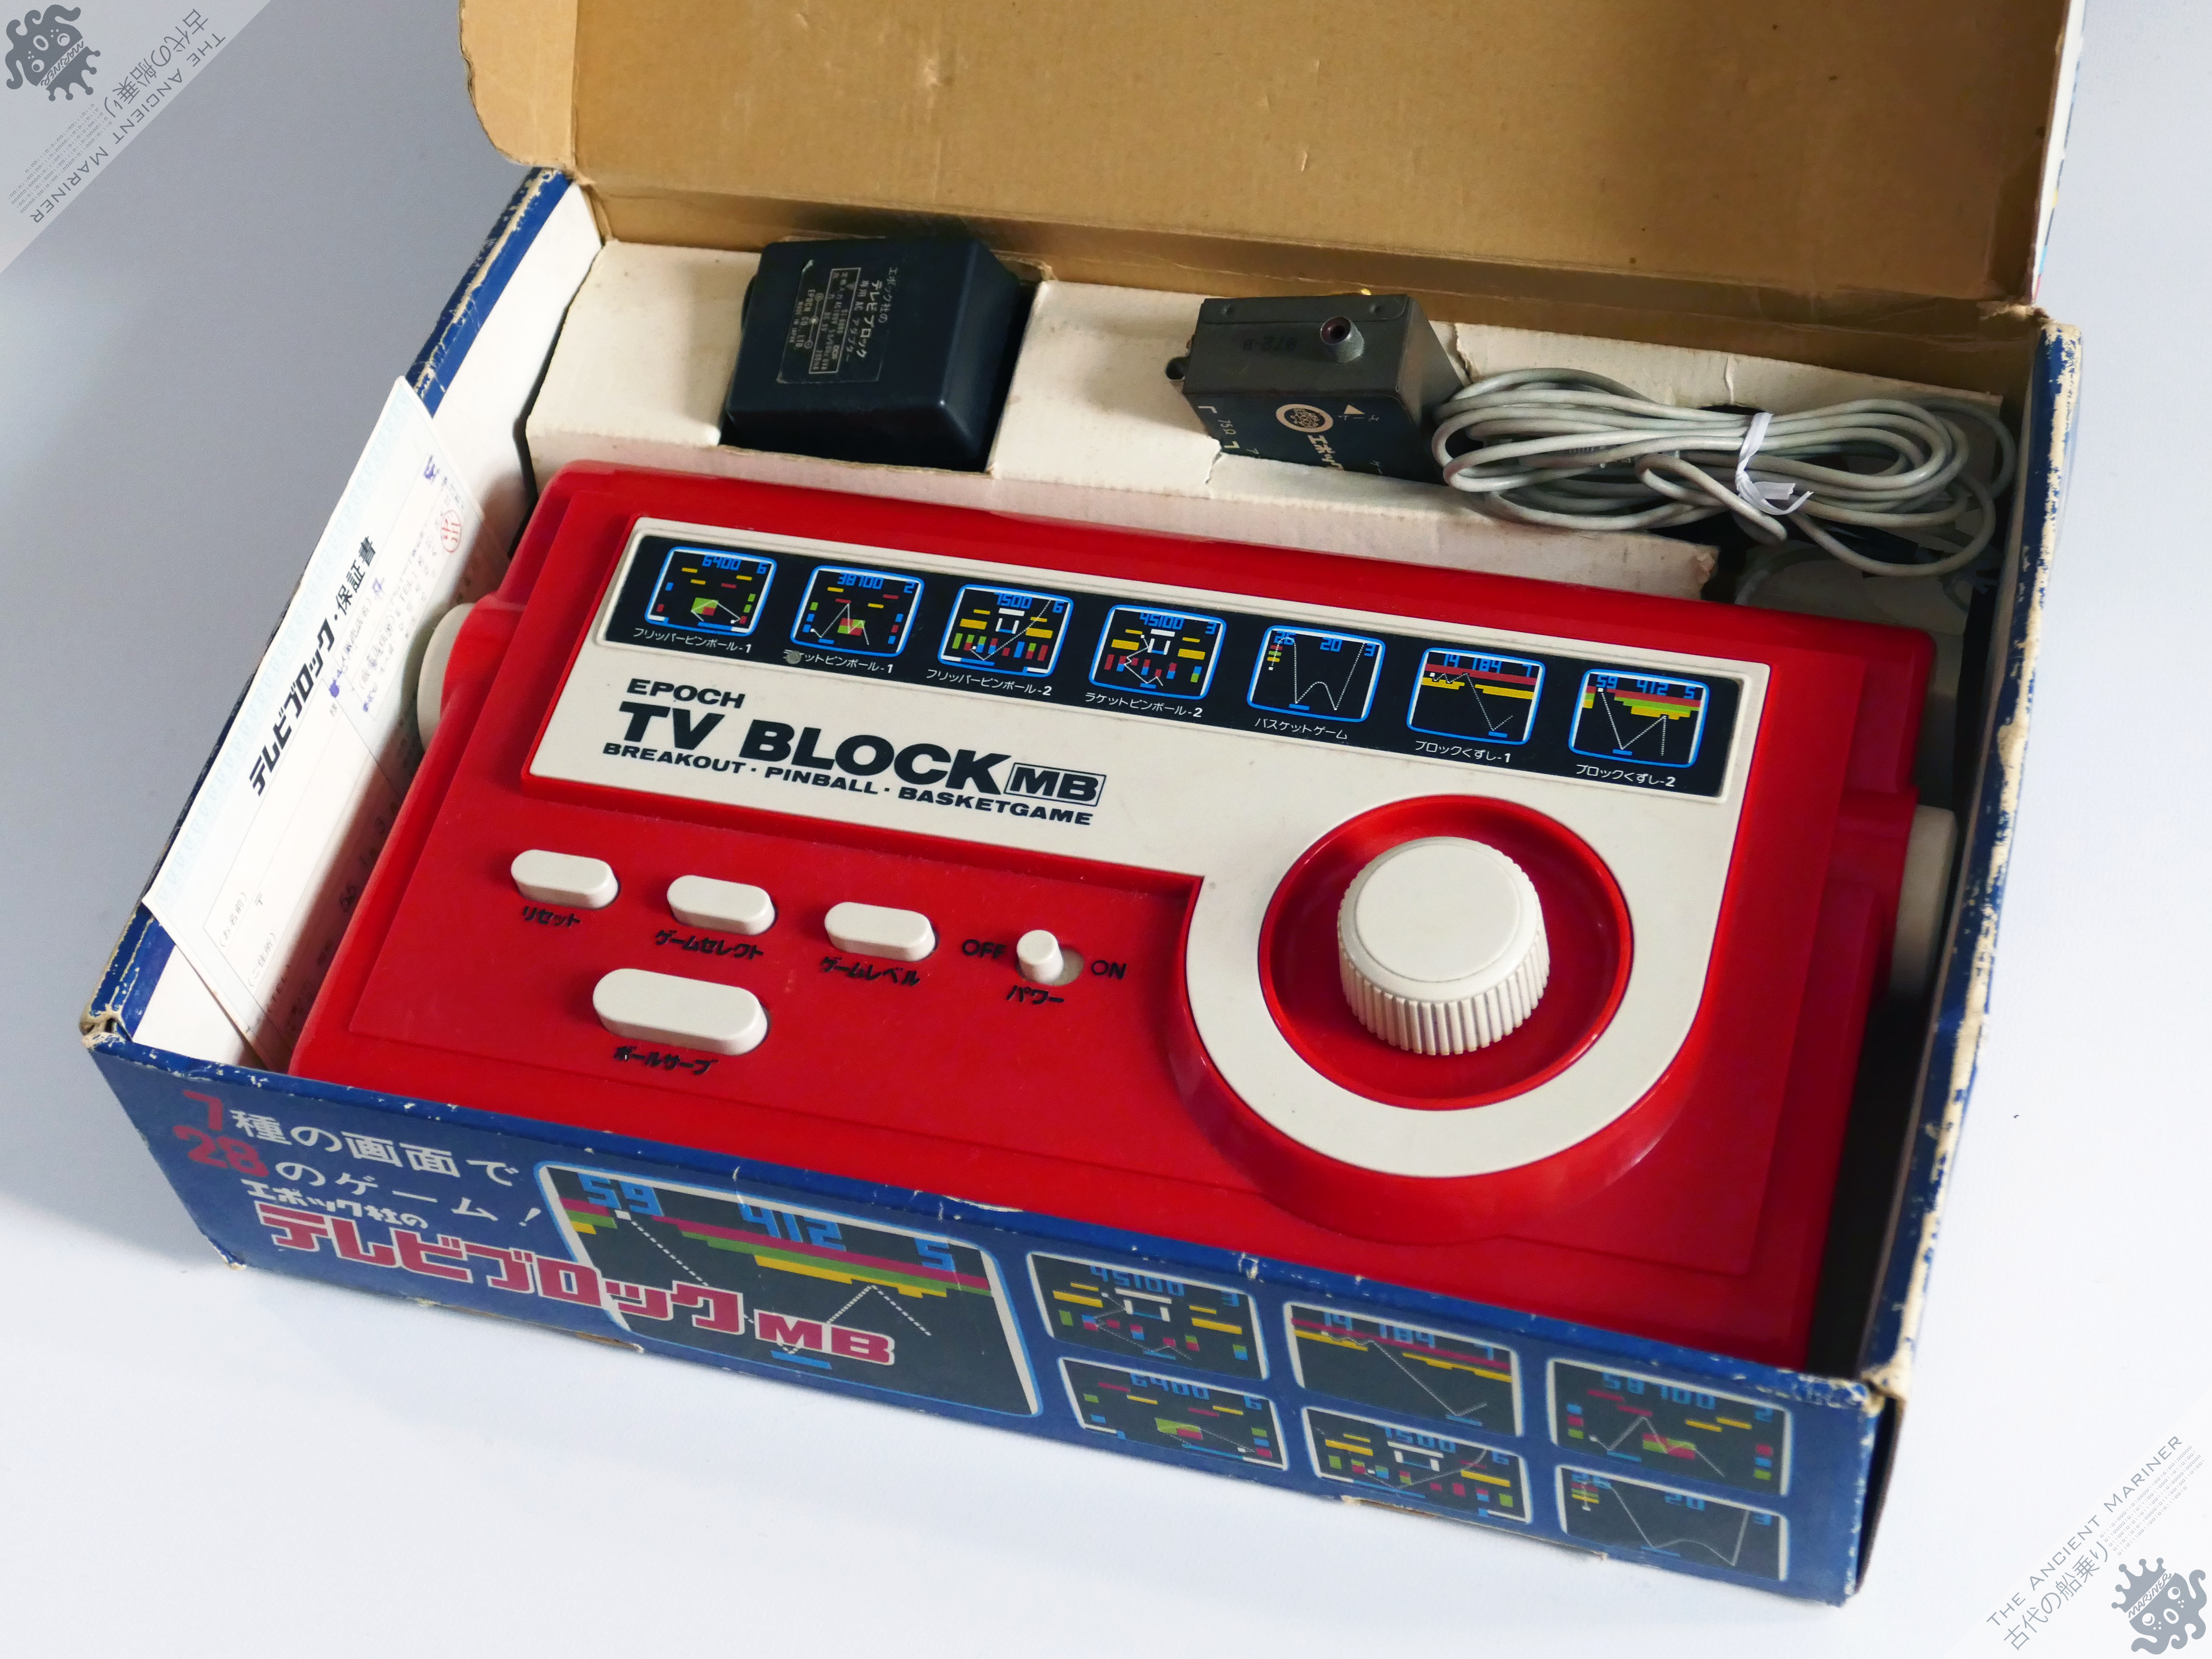 EPOCH T.V. BLOCK VINTAGE RETRO VIDEO COMPUTER GAME CONSOLE JAPAN ATARI PONG CLONE ELECTRONICS - Image 2 of 3